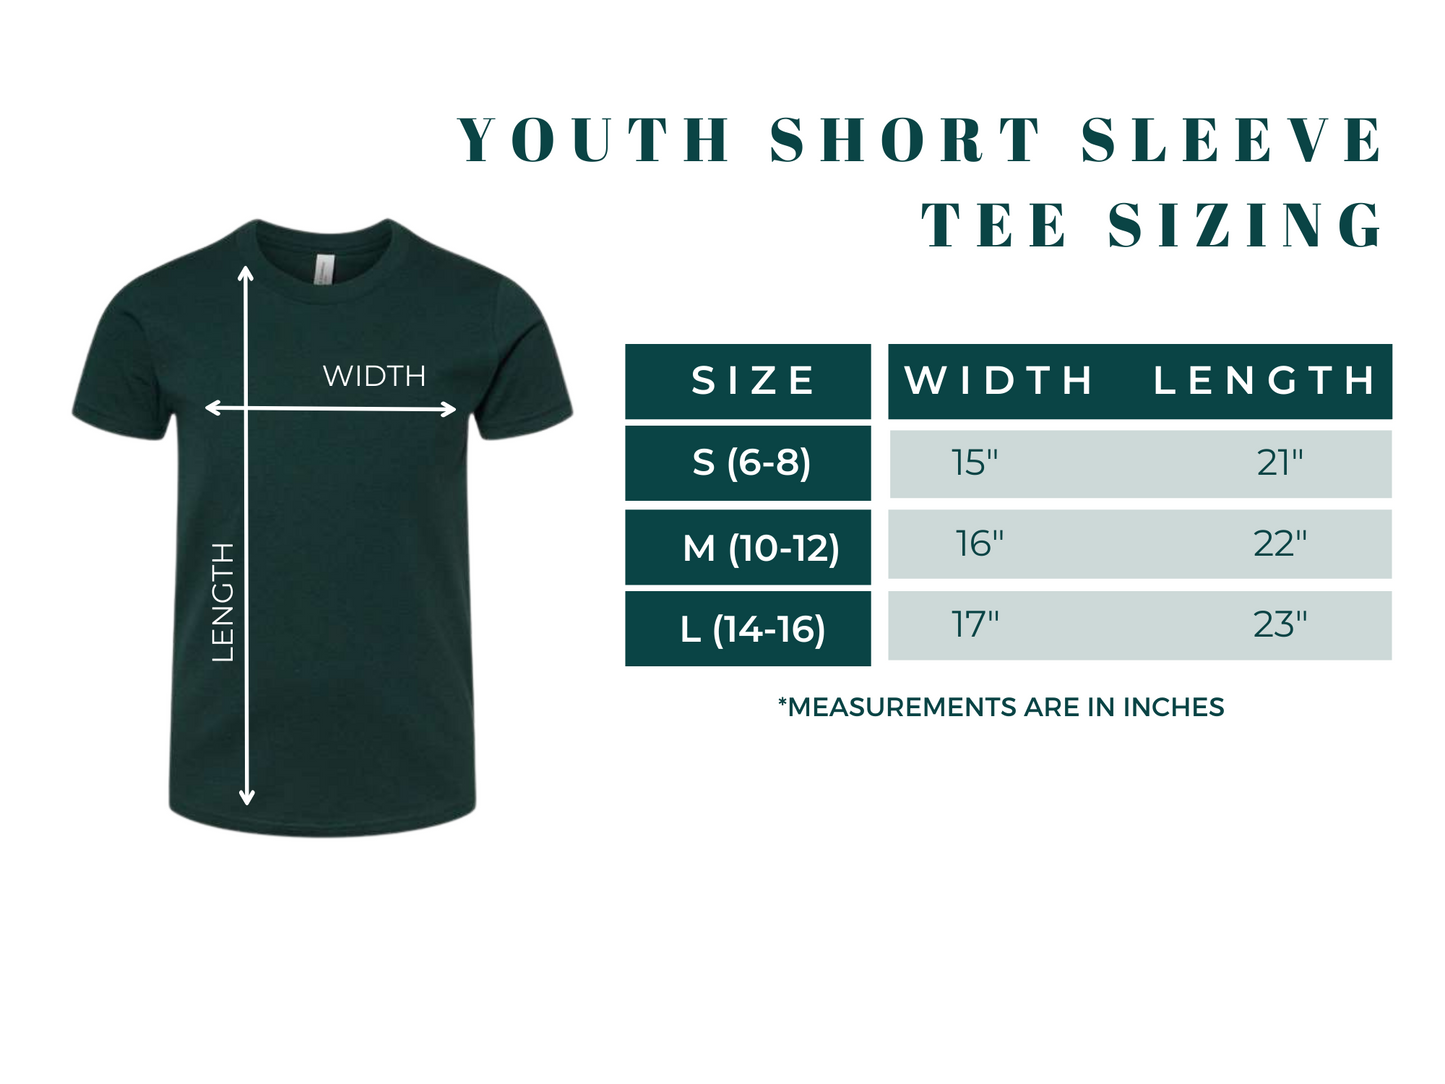 Merry Christmas Ya Filthy Animal | Short Sleeve Youth Tee | Closeout